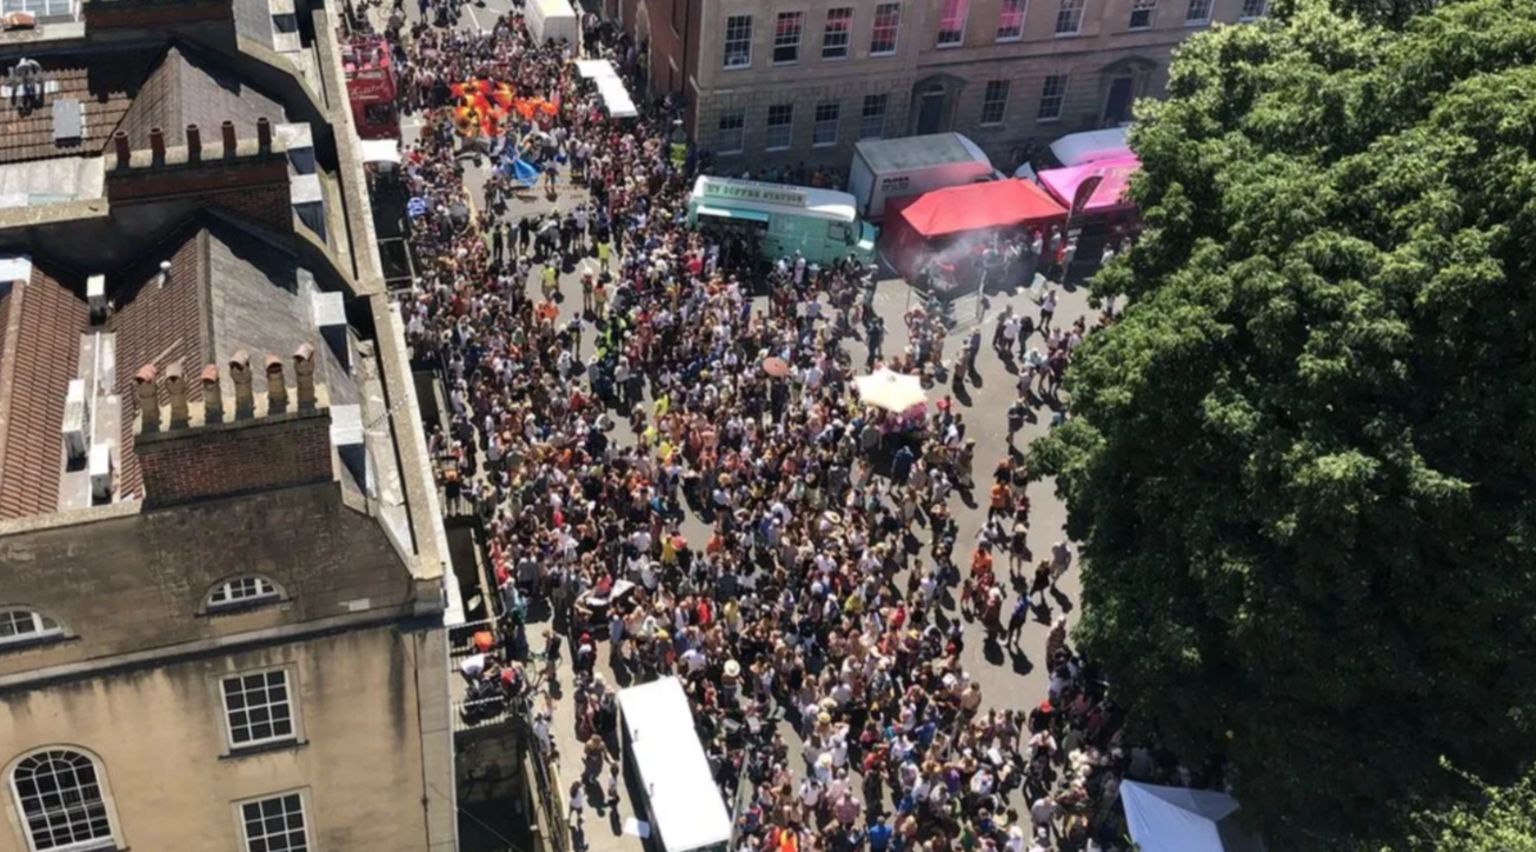 An aerial shot of crowds at the St Pauls Carnival in Bristol 